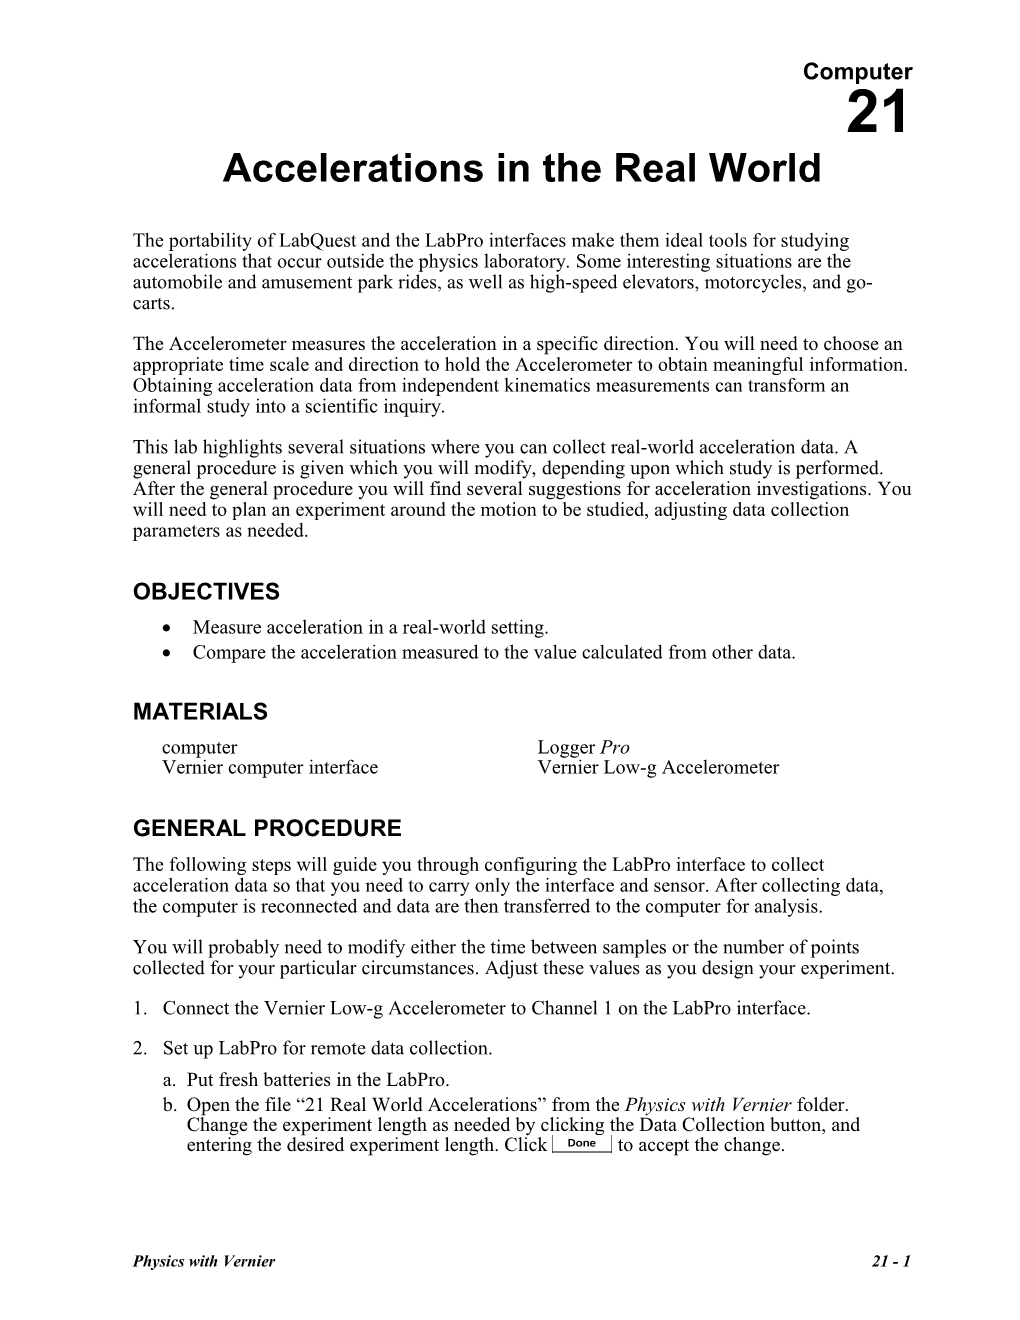 Accelerations in the Real World